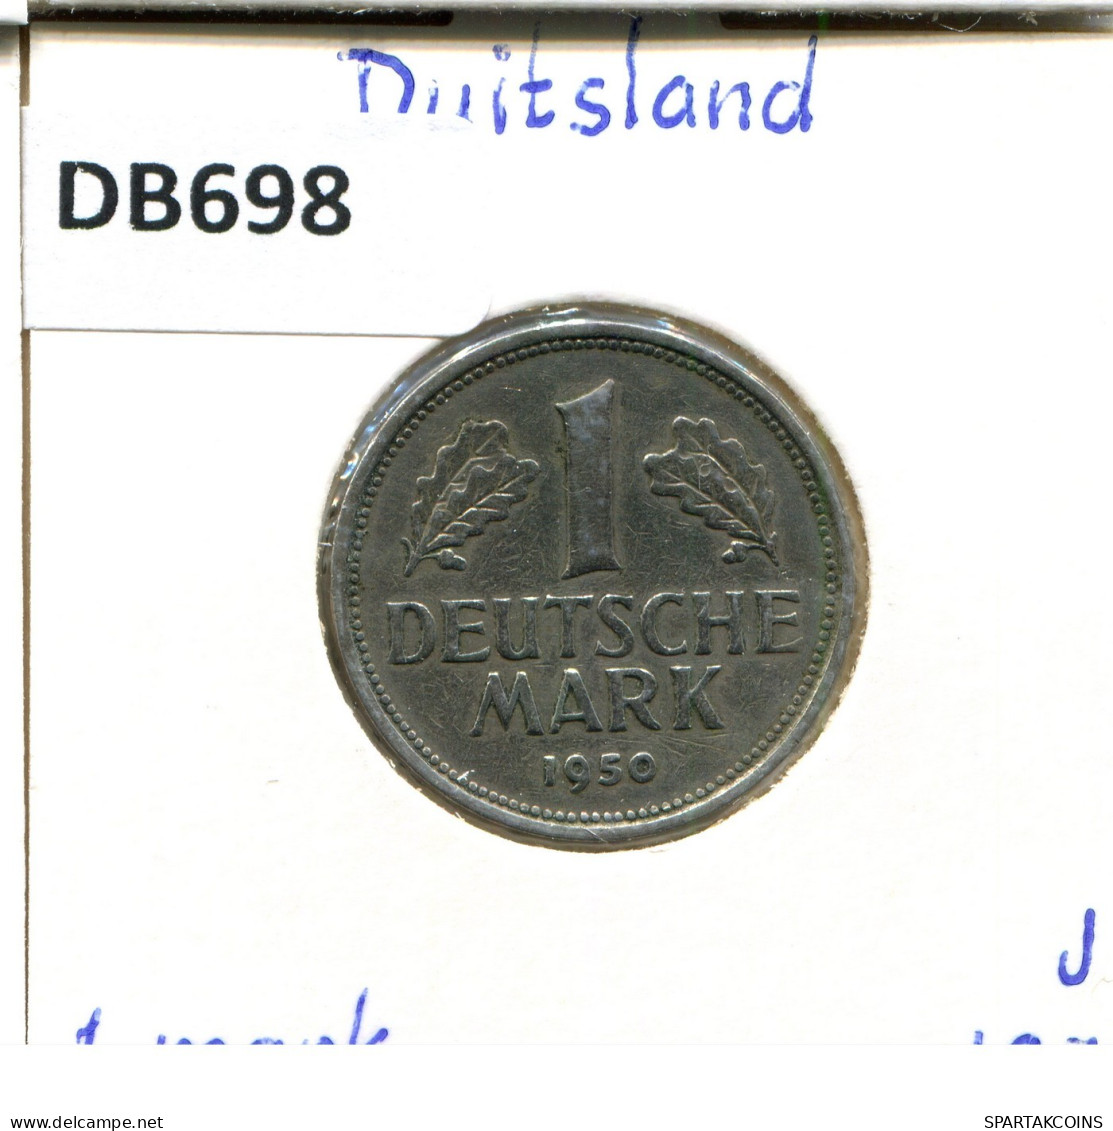 1 DM 1950 J WEST & UNIFIED GERMANY Coin #DB698.U.A - 1 Marco